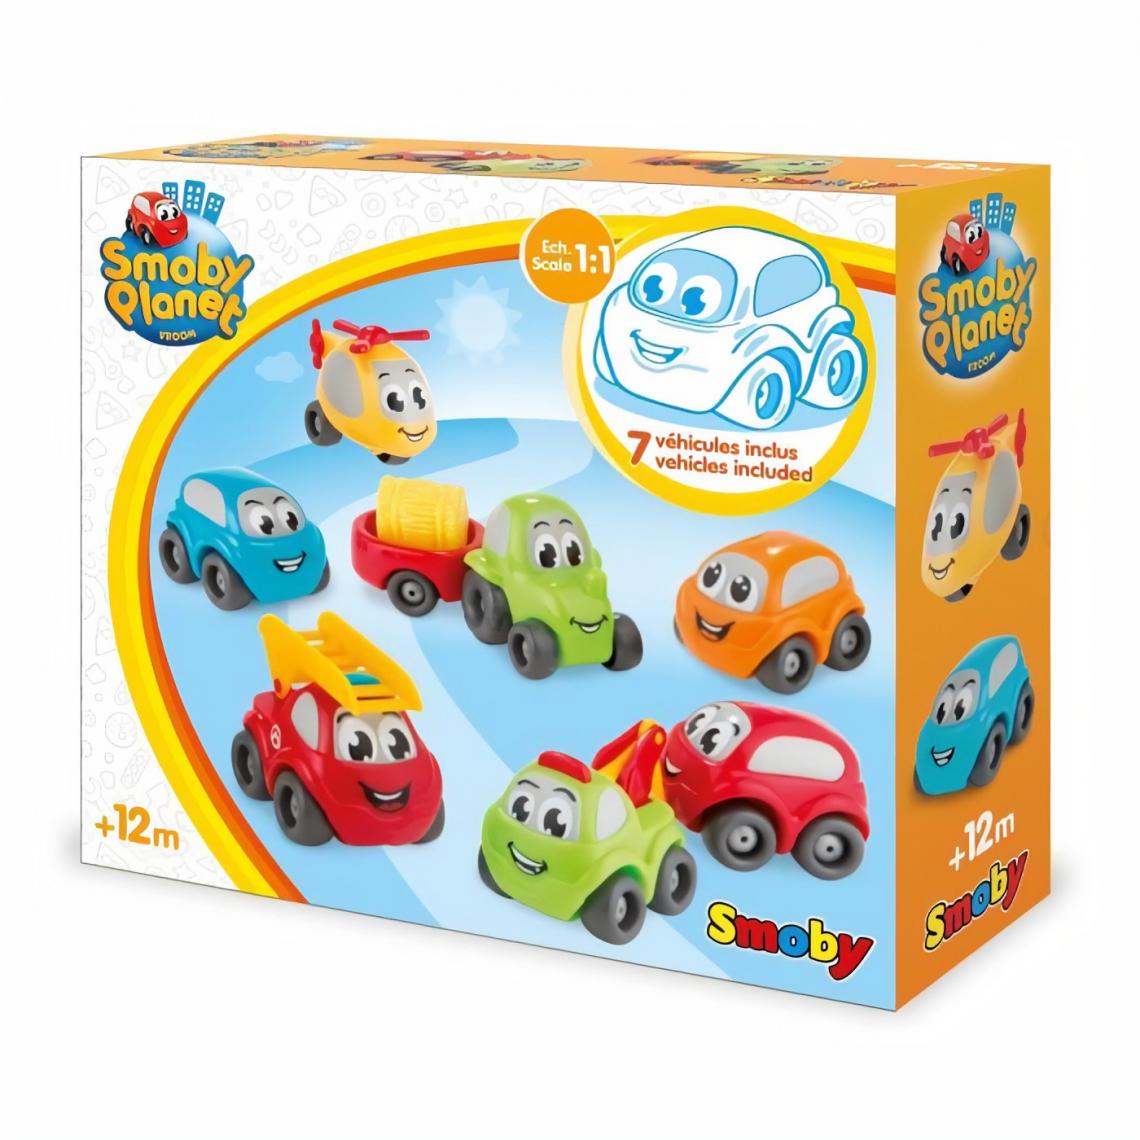 Smoby - VROOM PLANET Coffret 7 Collector - SMOBY - Hélicoptères RC